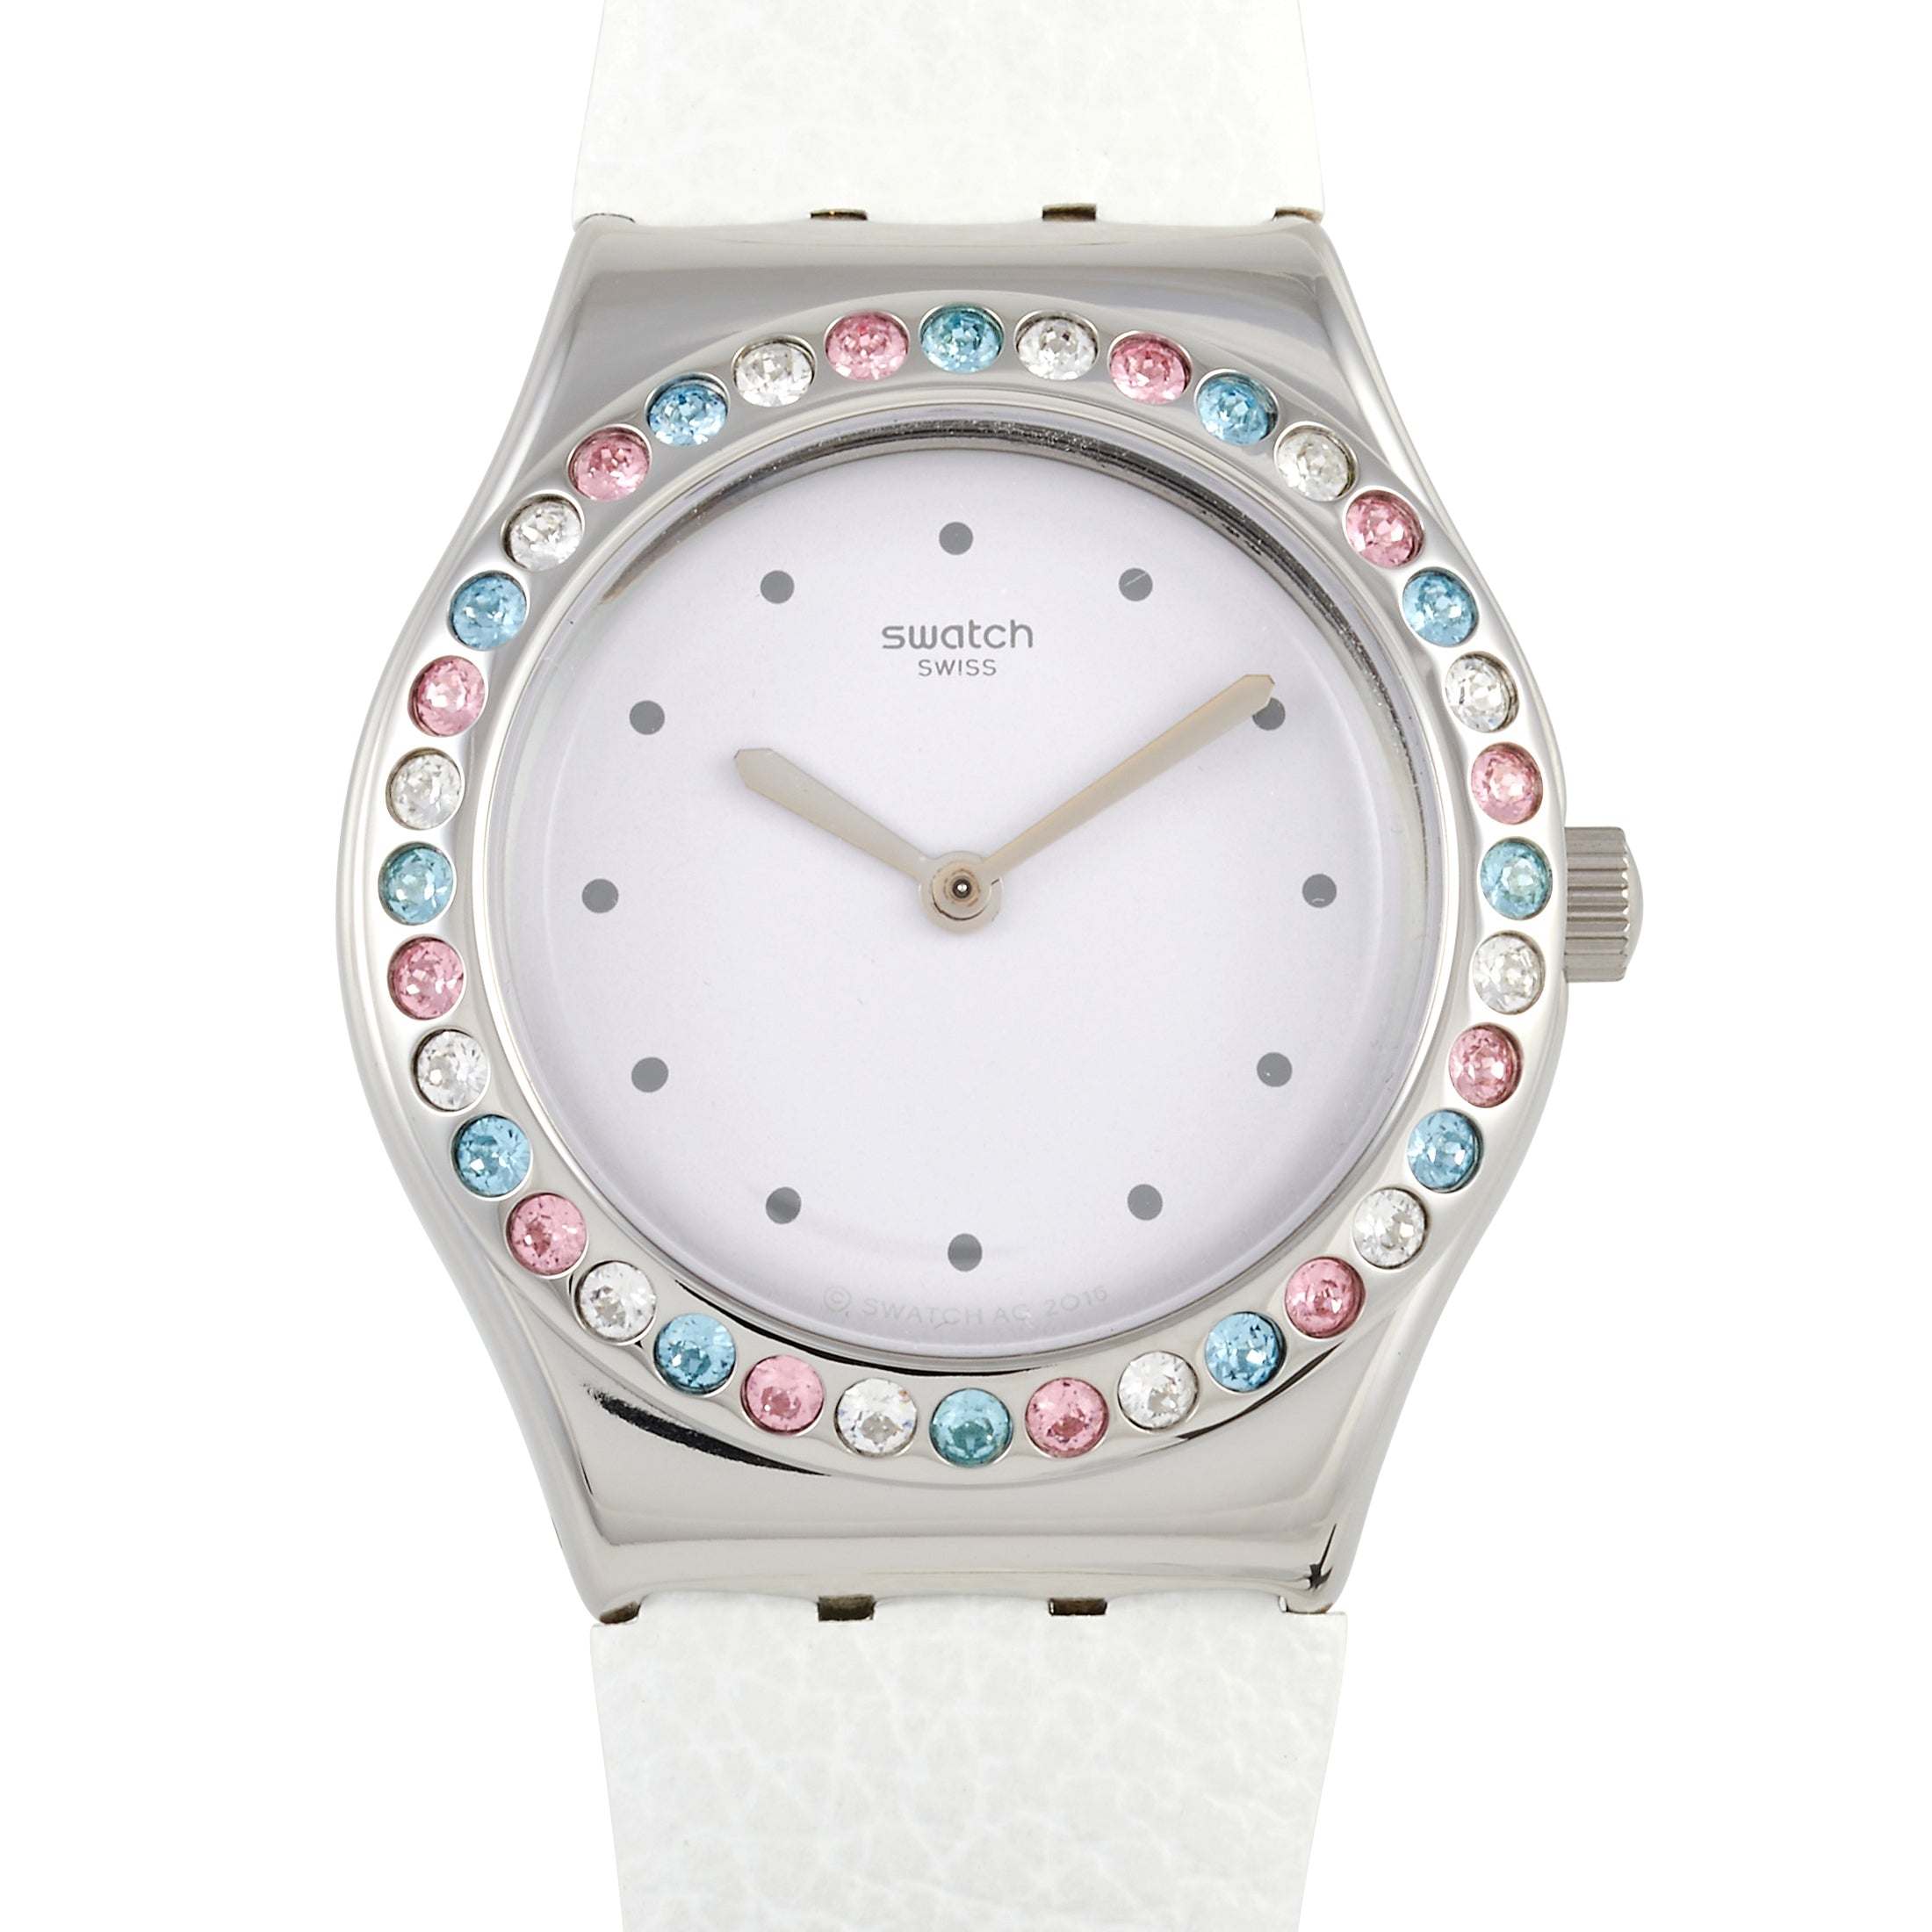 Swatch After Dinner Bejeweled White Ladies' Watch YLS201 female